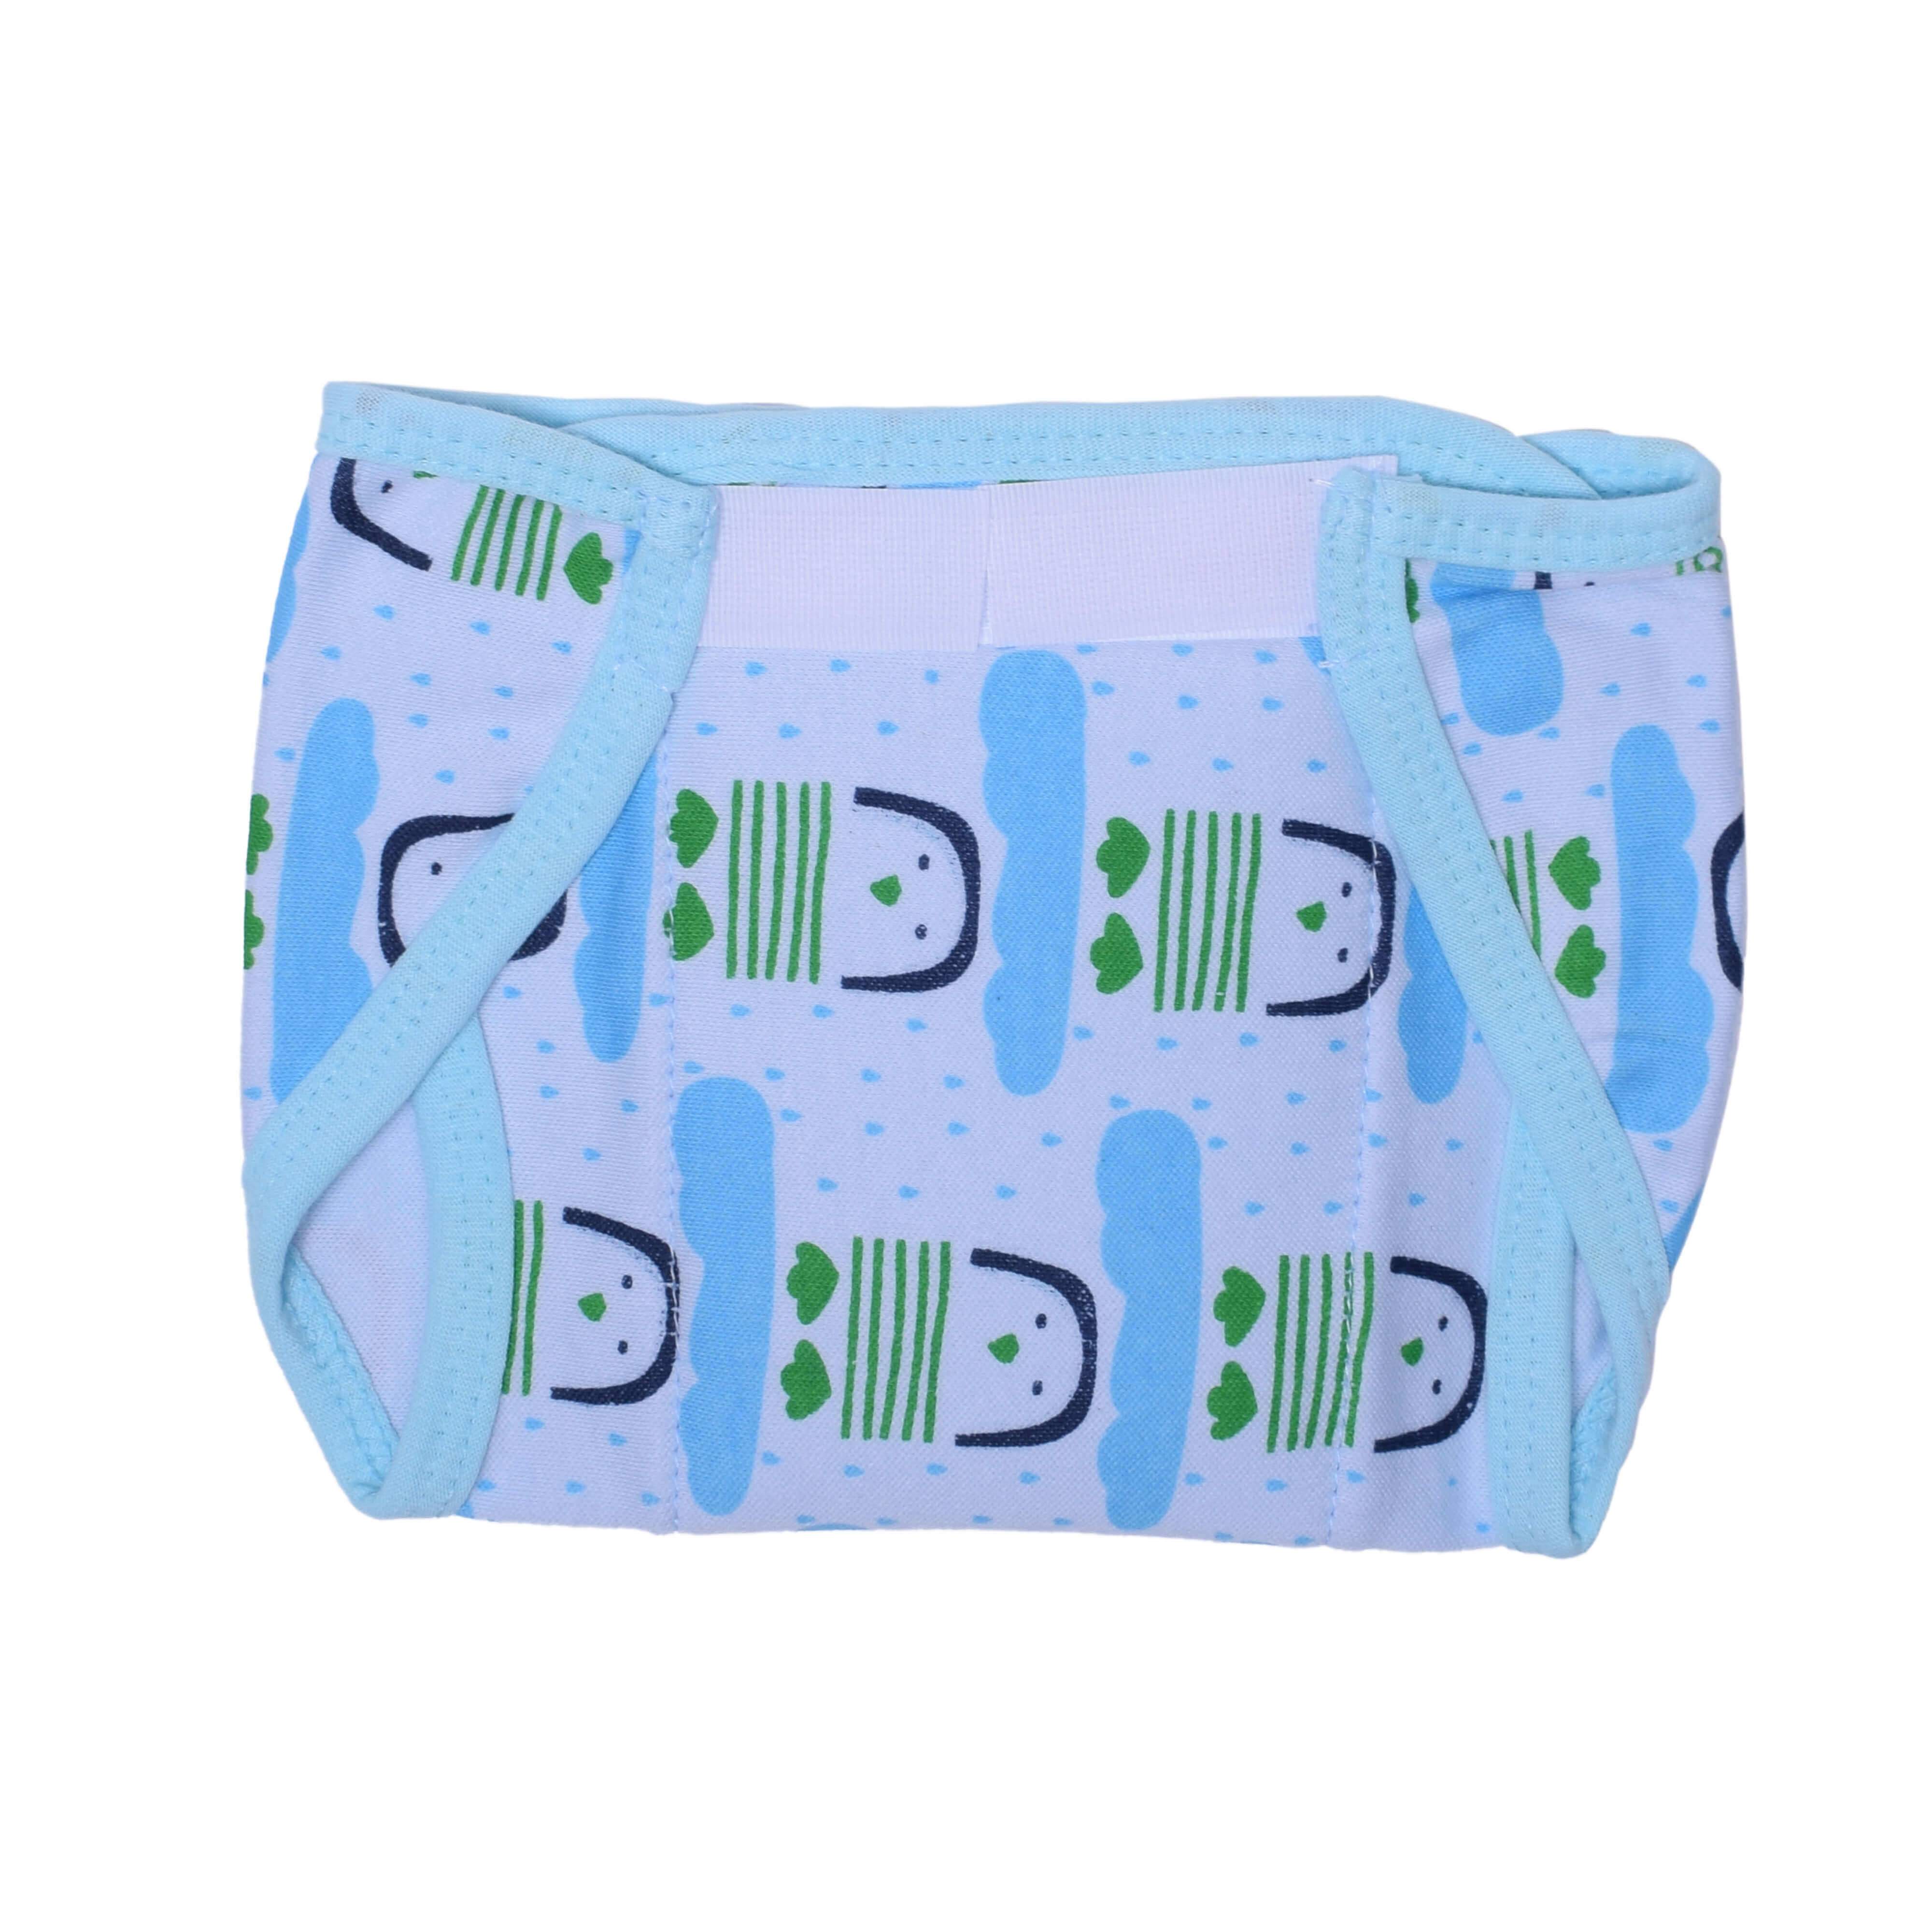 COZYCARE Washable Diapers Hosiery Velcro Penguin Print Green, Pink & Blue 3P Set (SS)